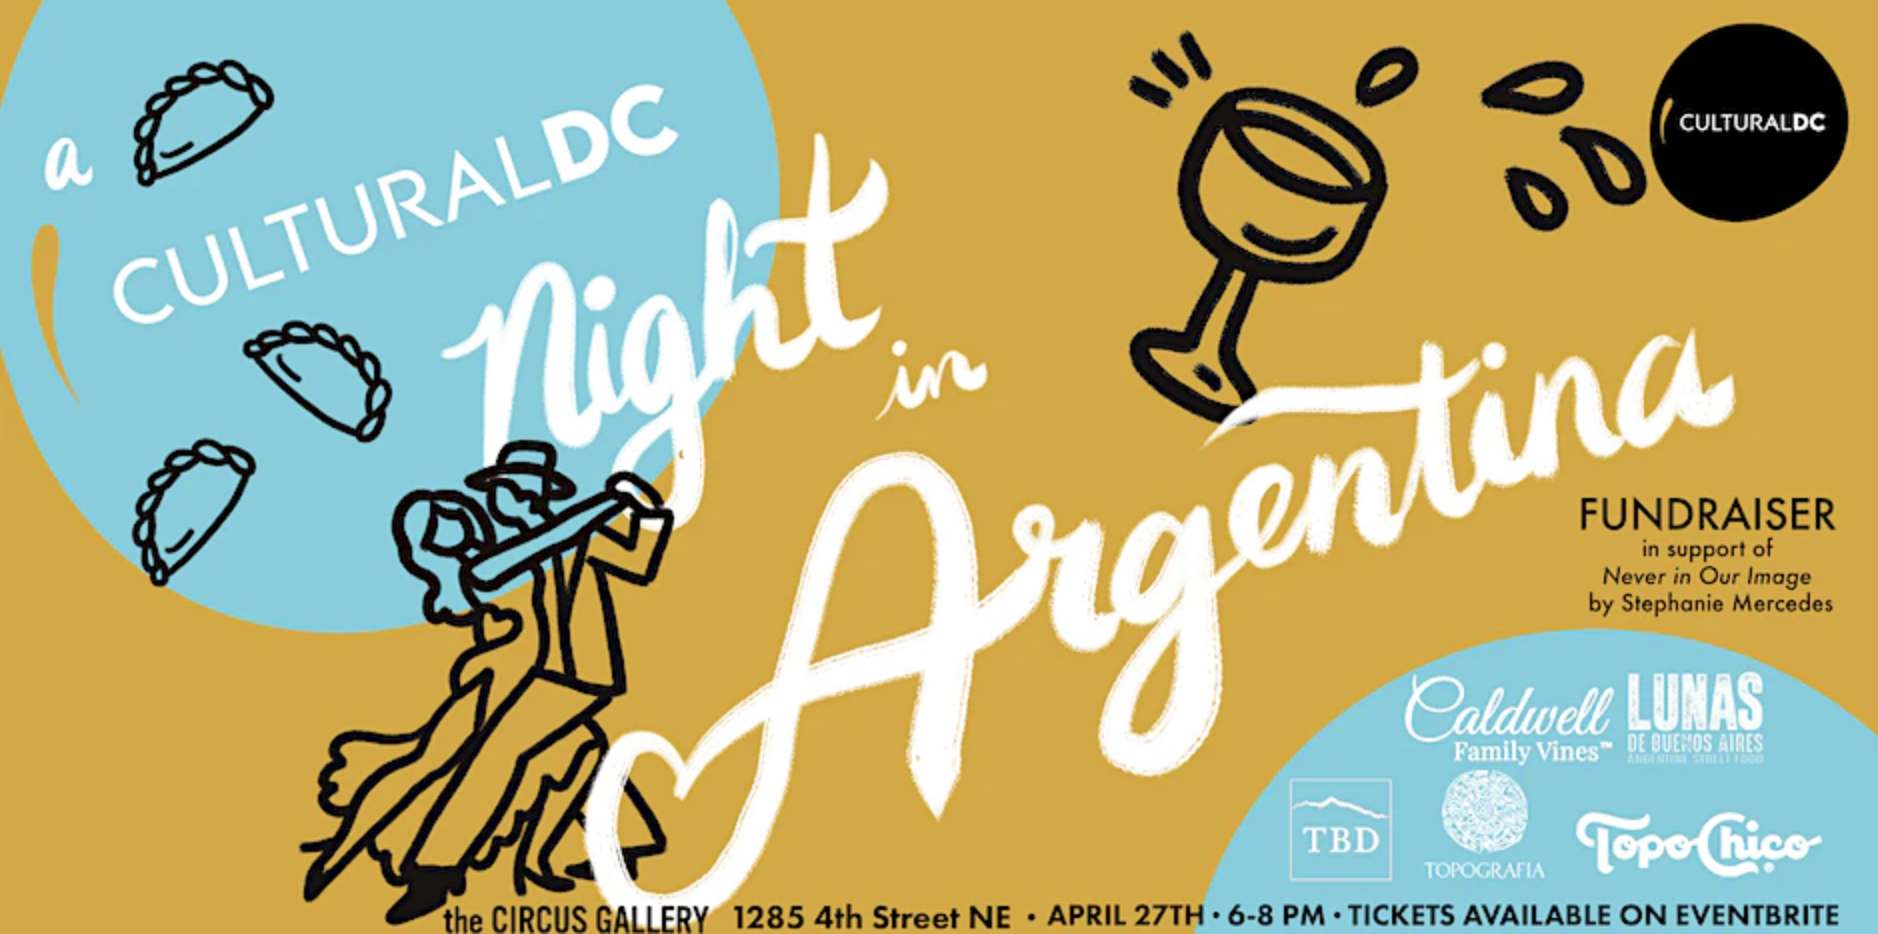 A CulturalDC Night in Argentina: Fundraiser for “Never in Our Image”